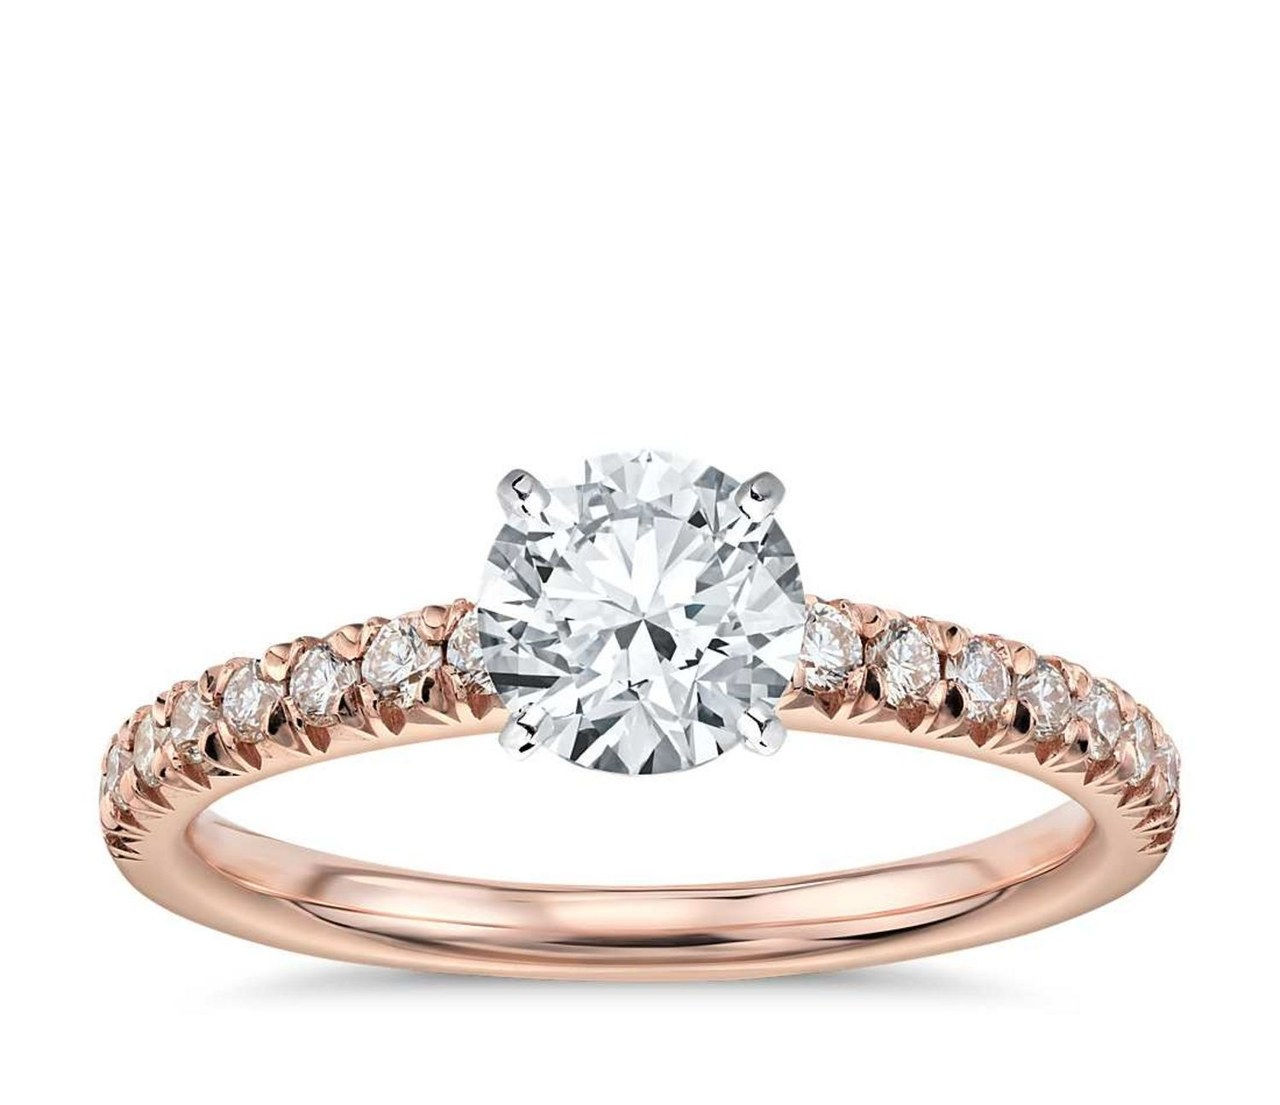 4 best new engagement rings trends 2015 0108 courtesy